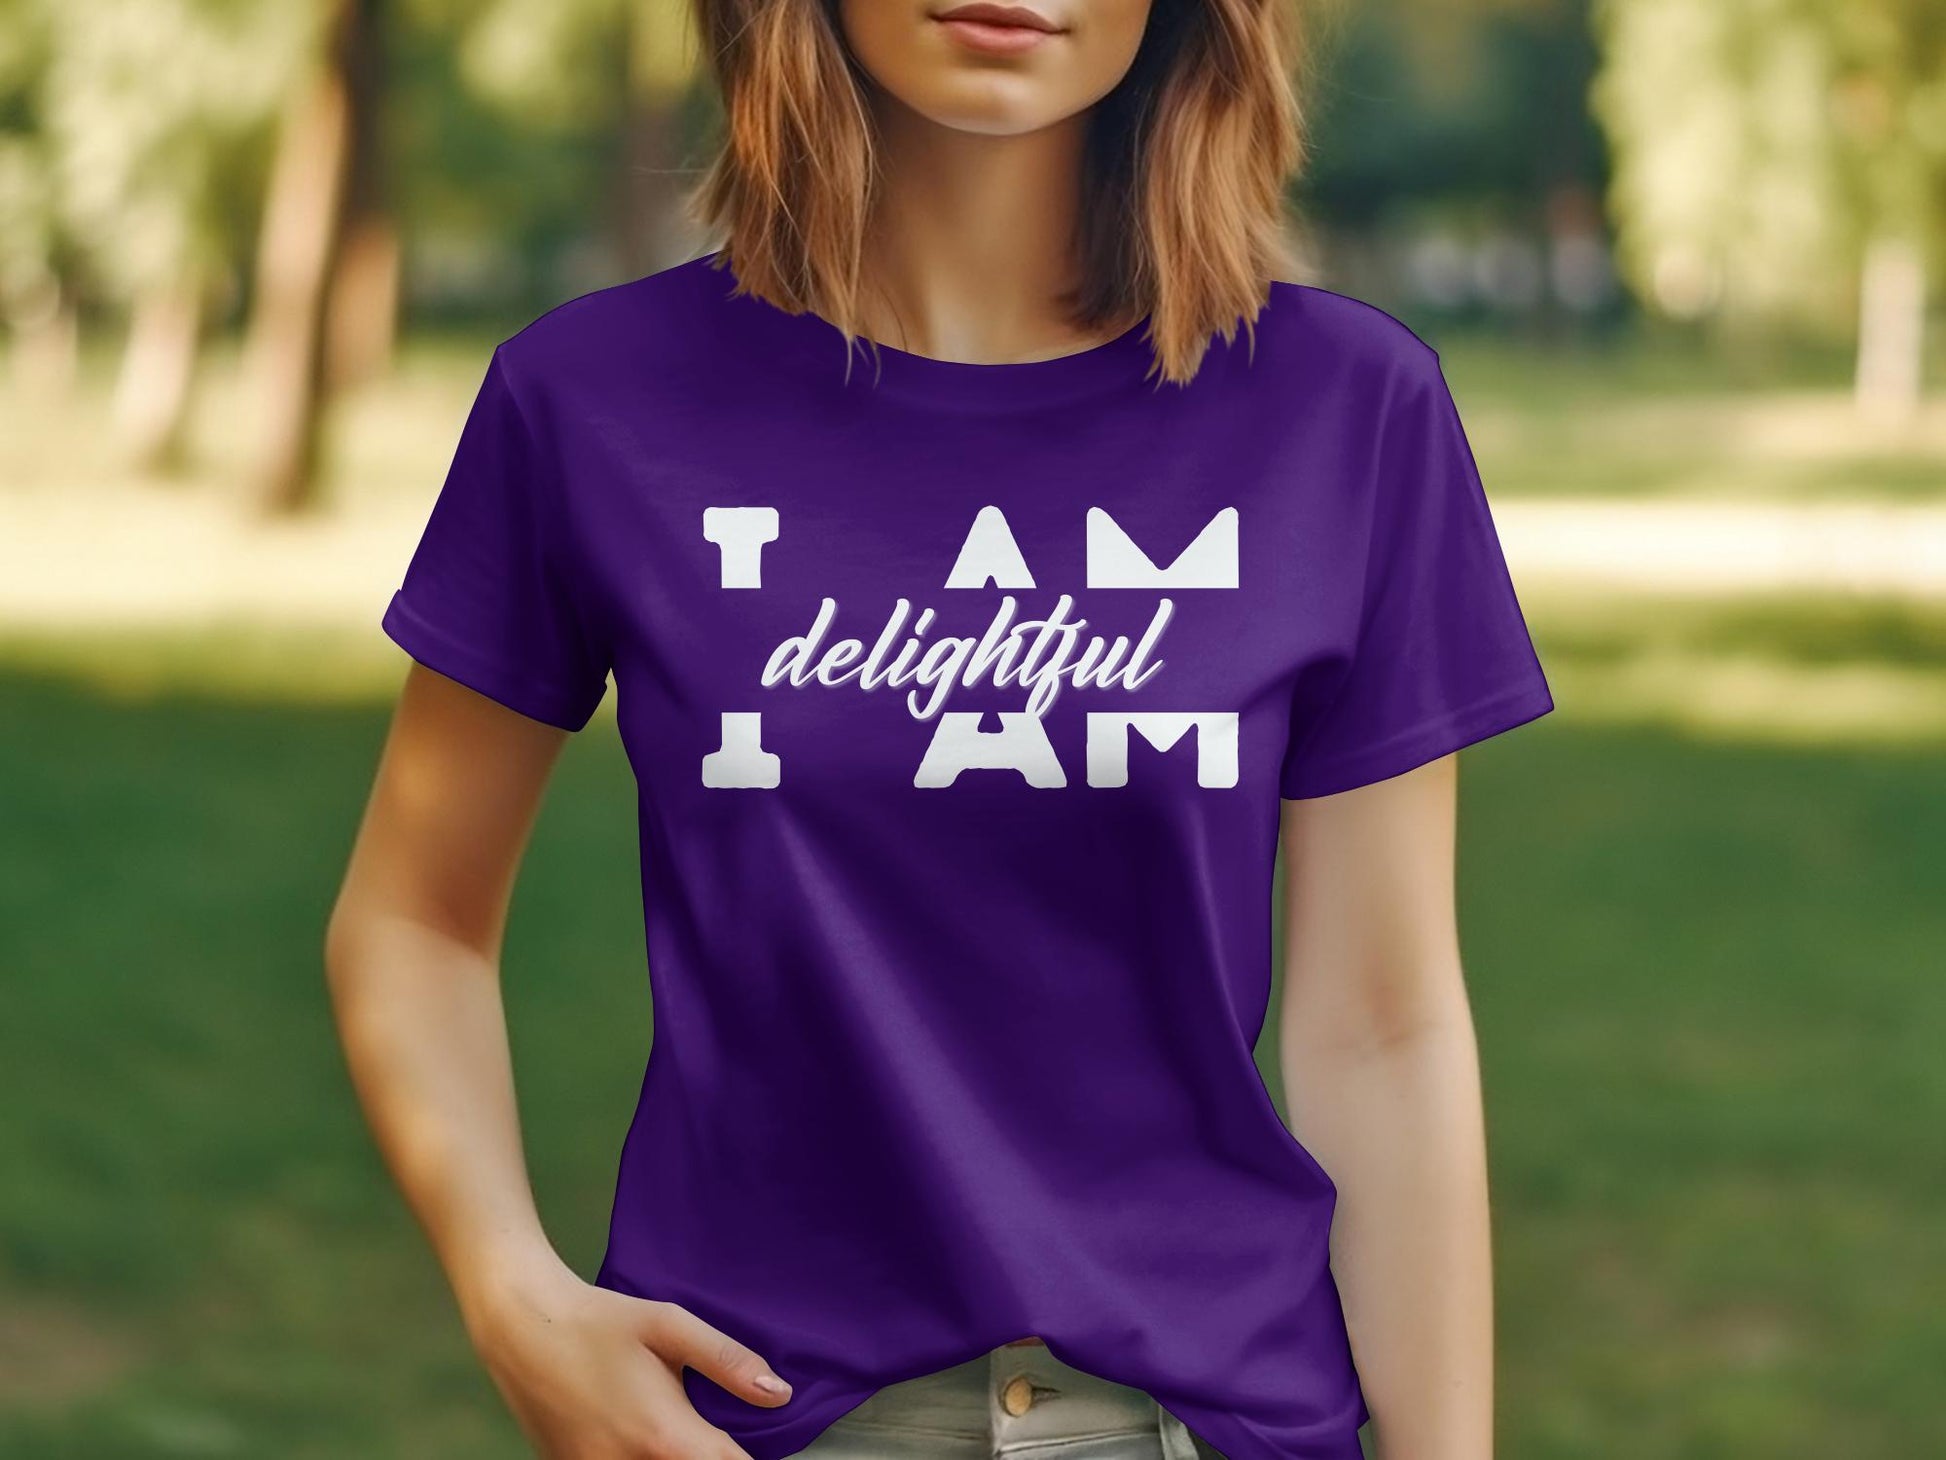 I Am Delightful - An encouraging and motivating Affirmation Quote T-shirt.